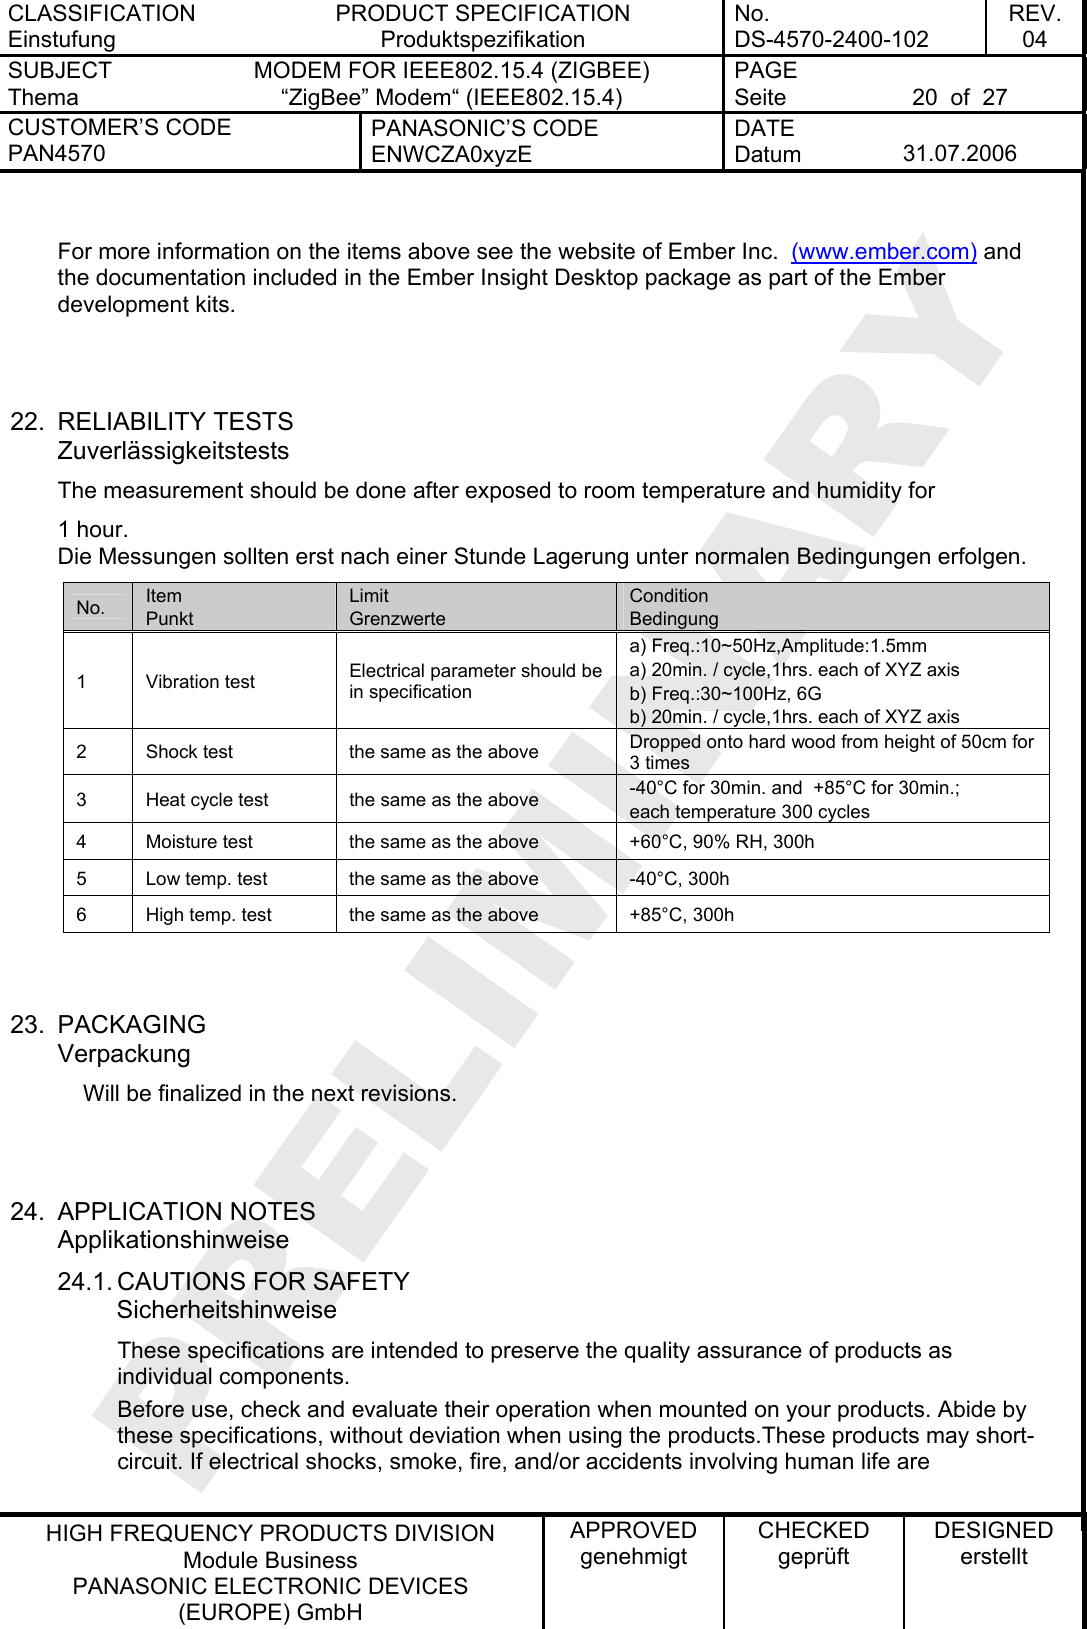 CLASSIFICATION Einstufung PRODUCT SPECIFICATION Produktspezifikation No. DS-4570-2400-102 REV. 04 SUBJECT Thema MODEM FOR IEEE802.15.4 (ZIGBEE) “ZigBee” Modem“ (IEEE802.15.4)   PAGE Seite  20  of  27 CUSTOMER’S CODE PAN4570 PANASONIC’S CODE ENWCZA0xyzE DATE Datum  31.07.2006   HIGH FREQUENCY PRODUCTS DIVISION Module Business PANASONIC ELECTRONIC DEVICES  (EUROPE) GmbH APPROVED genehmigt CHECKED geprüft DESIGNED erstellt  For more information on the items above see the website of Ember Inc.  (www.ember.com) and the documentation included in the Ember Insight Desktop package as part of the Ember development kits.    22. RELIABILITY TESTS Zuverlässigkeitstests The measurement should be done after exposed to room temperature and humidity for 1 hour. Die Messungen sollten erst nach einer Stunde Lagerung unter normalen Bedingungen erfolgen. No.  Item Punkt Limit Grenzwerte Condition Bedingung 1 Vibration test  Electrical parameter should be in specification a) Freq.:10~50Hz,Amplitude:1.5mm a) 20min. / cycle,1hrs. each of XYZ axis b) Freq.:30~100Hz, 6G b) 20min. / cycle,1hrs. each of XYZ axis 2  Shock test  the same as the above  Dropped onto hard wood from height of 50cm for 3 times 3  Heat cycle test  the same as the above  -40°C for 30min. and  +85°C for 30min.;  each temperature 300 cycles 4  Moisture test  the same as the above  +60°C, 90% RH, 300h 5  Low temp. test  the same as the above  -40°C, 300h 6  High temp. test  the same as the above  +85°C, 300h   23. PACKAGING Verpackung     Will be finalized in the next revisions.   24. APPLICATION NOTES Applikationshinweise 24.1. CAUTIONS FOR SAFETY Sicherheitshinweise These specifications are intended to preserve the quality assurance of products as individual components. Before use, check and evaluate their operation when mounted on your products. Abide by these specifications, without deviation when using the products.These products may short-circuit. If electrical shocks, smoke, fire, and/or accidents involving human life are  